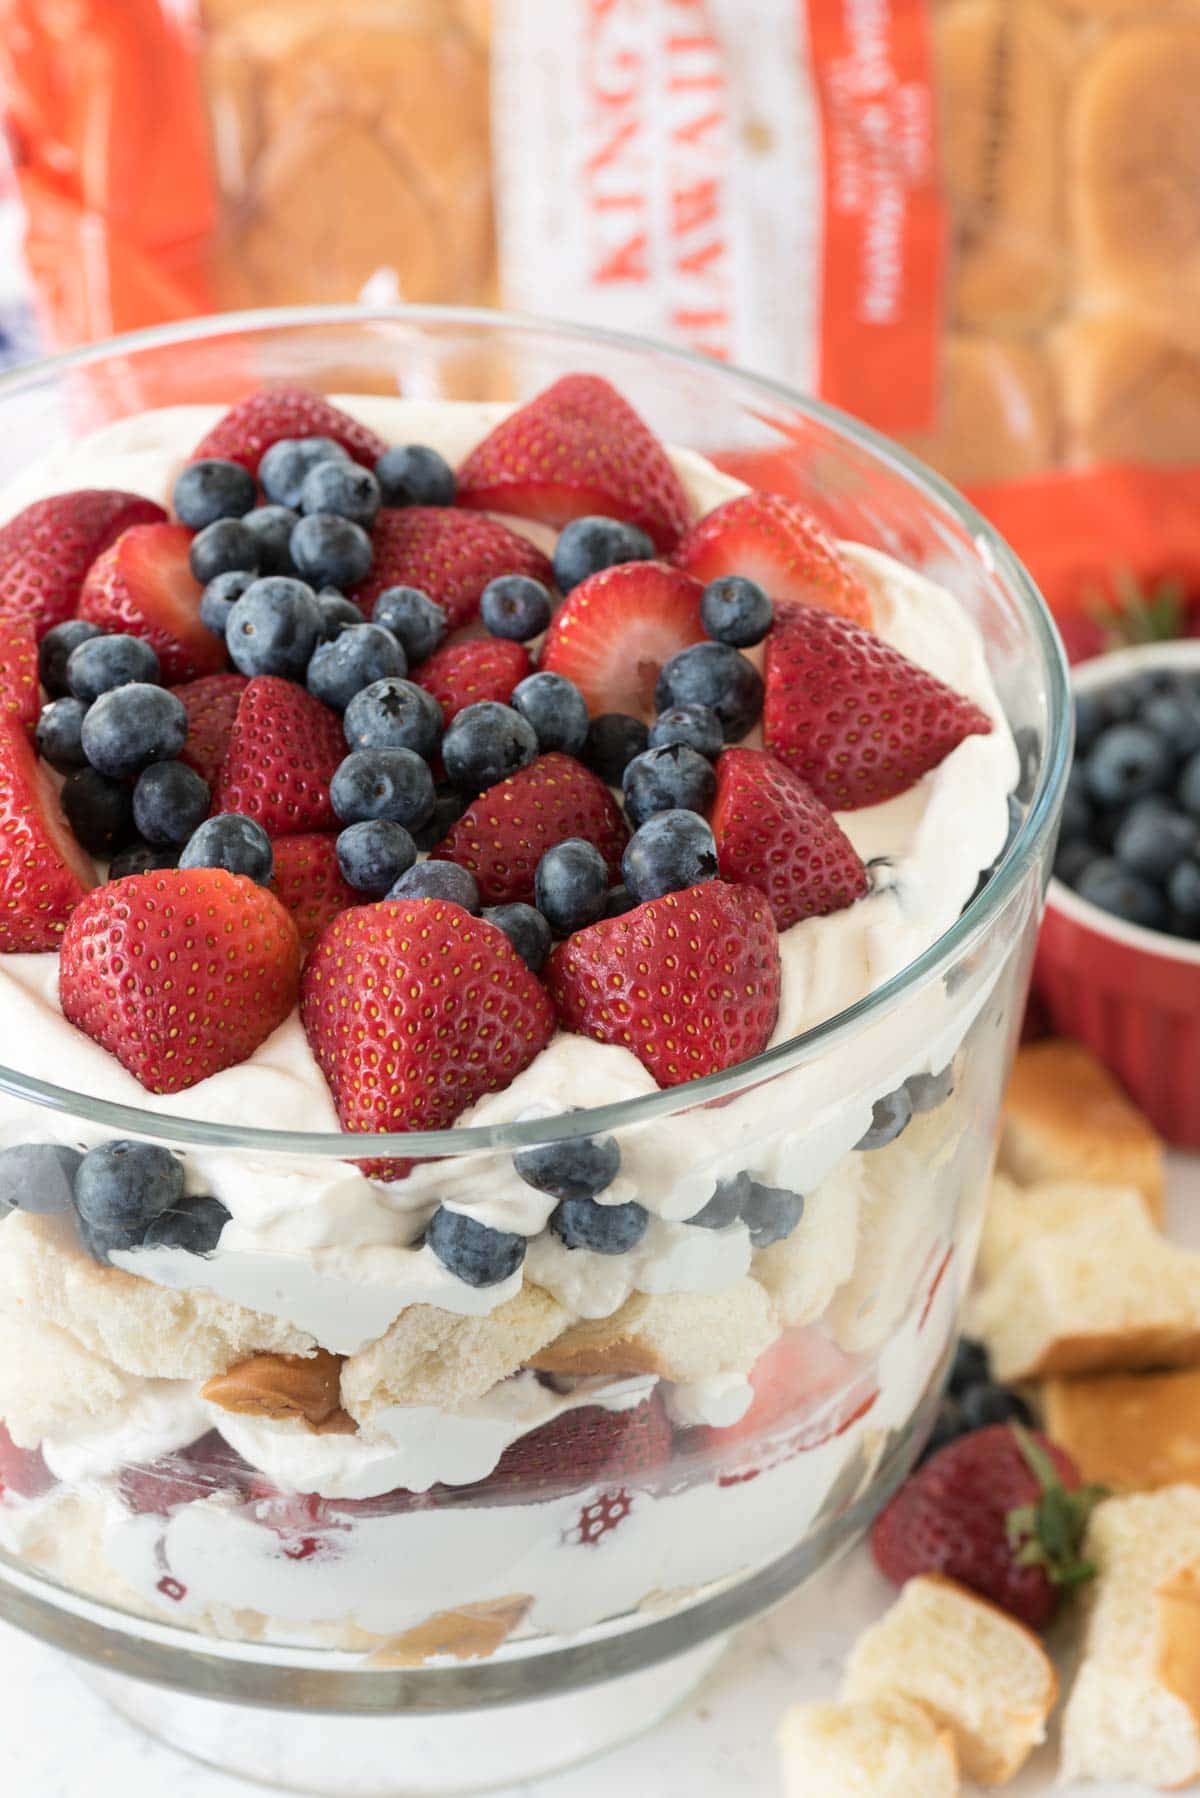 No Bake Berry Shortcake Trifle - this shortcake recipe is SO easy using fresh whipped cream, your favorite berries, and King's Hawaiian Dinner Rolls.